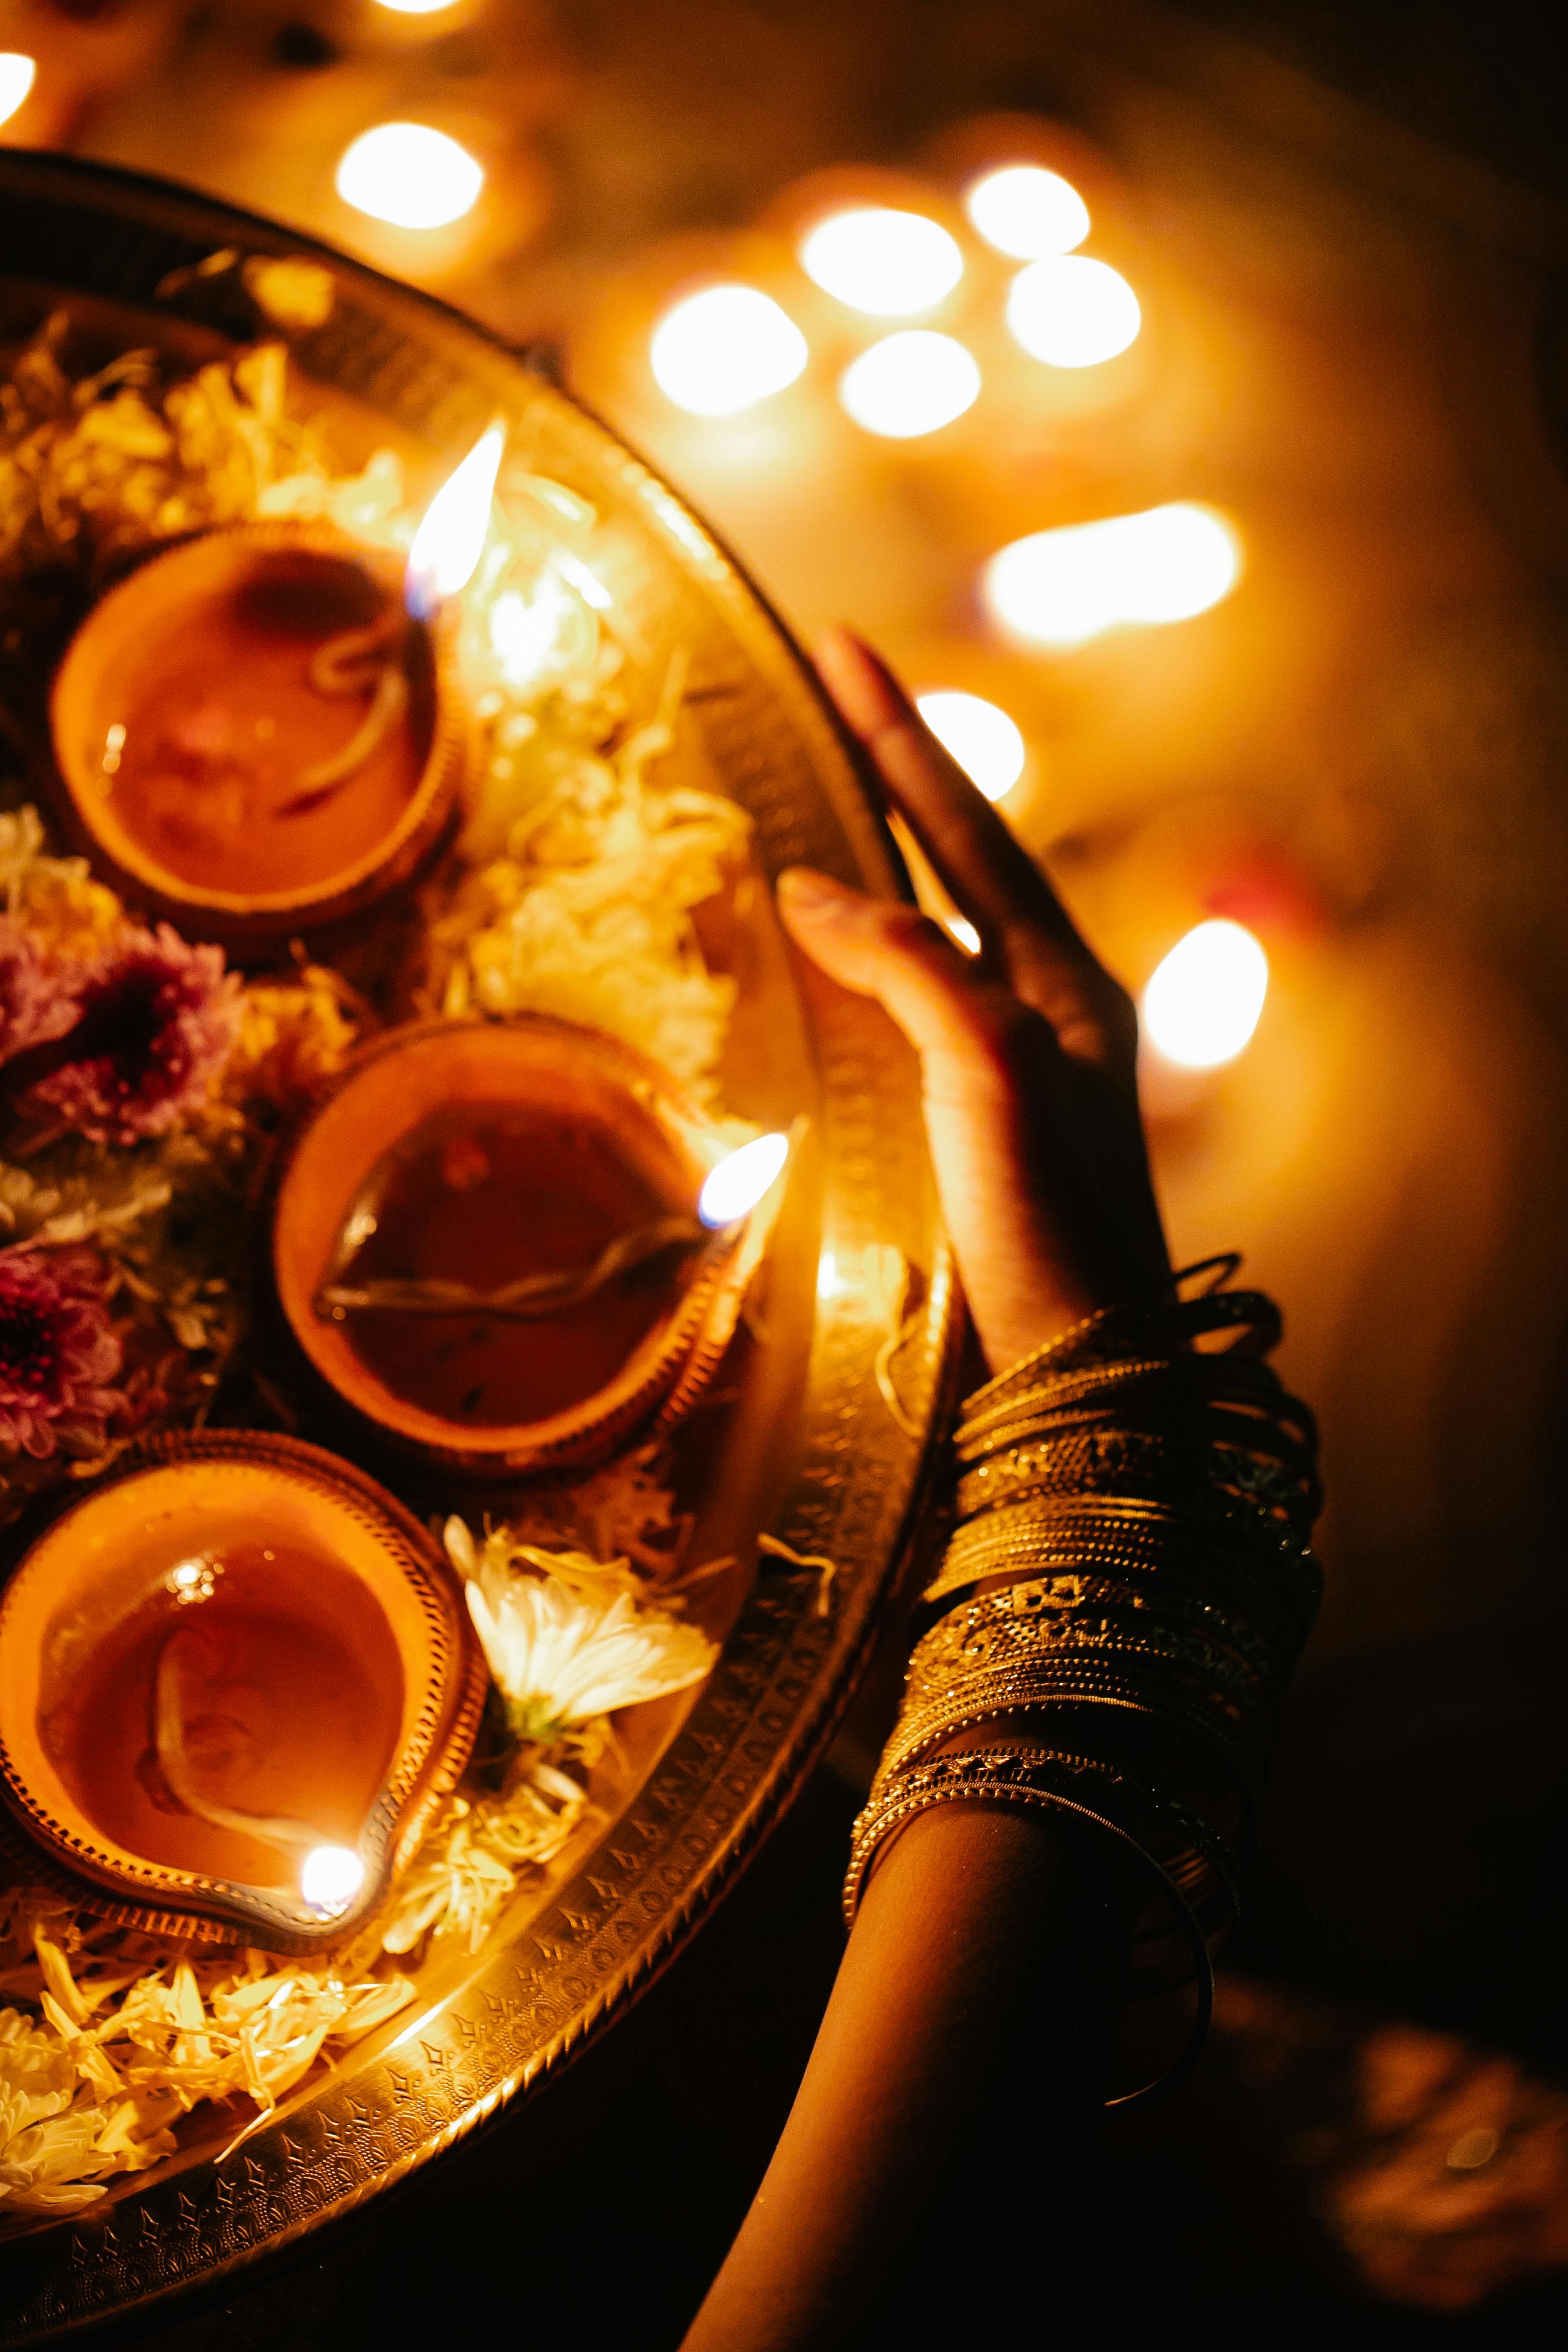 a person wearing bracelets holding a tray with flowers and candlelight